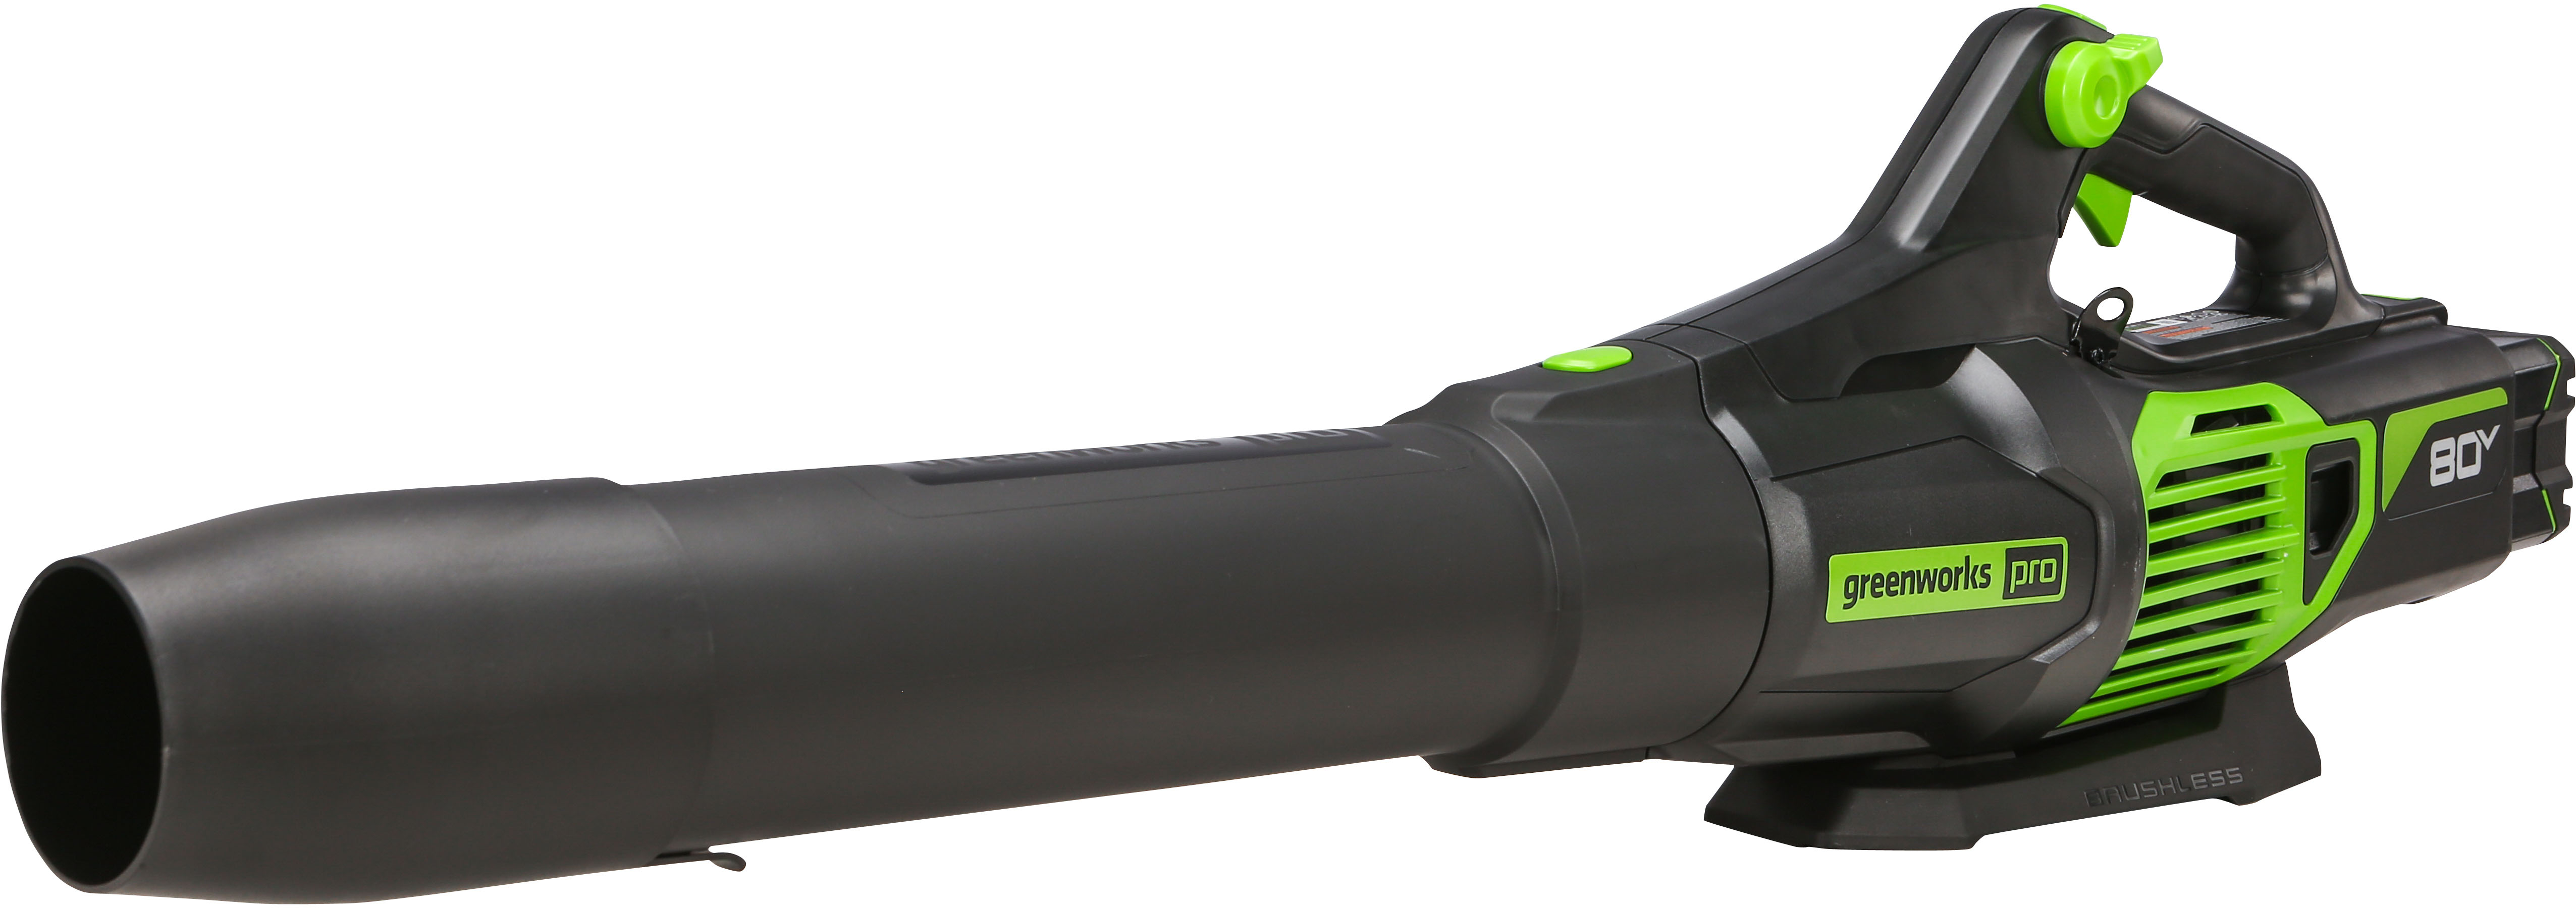 Left View: Greenworks - 24-Volt 110 MPH 450 CFM Cordless Handheld Blower (1 x 4.0Ah Battery and 1 x  Charger) - Black/Green